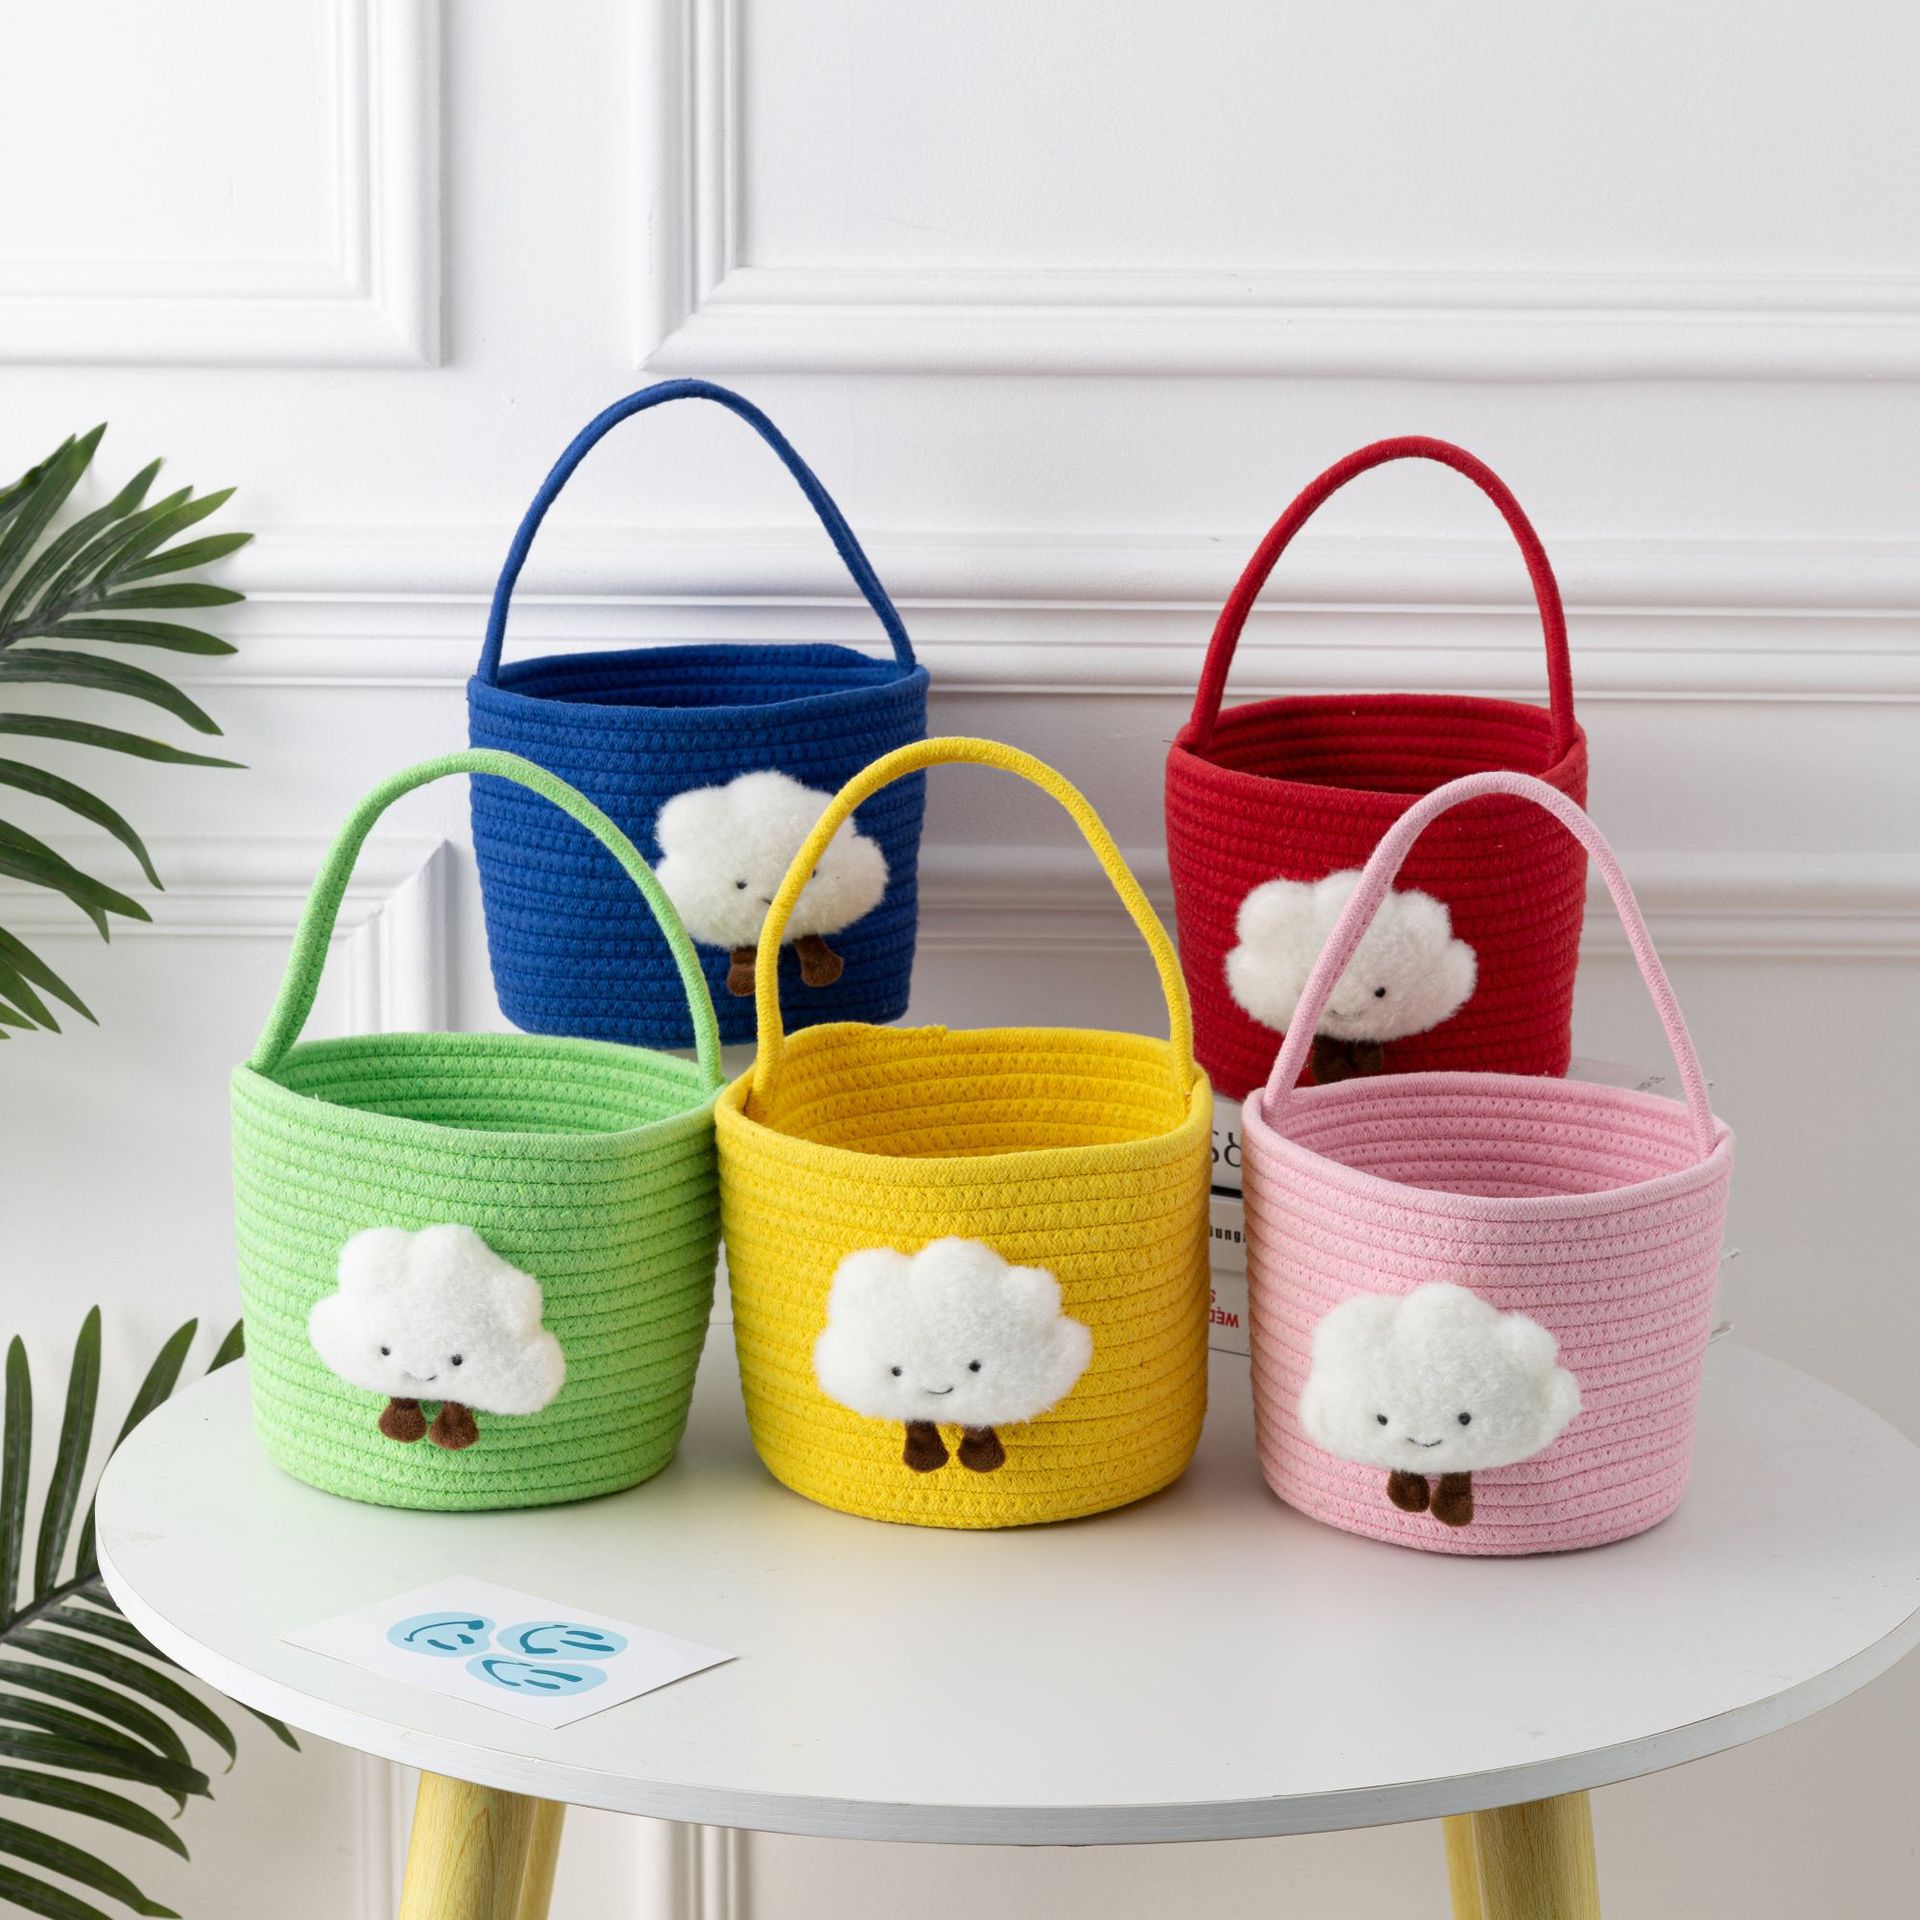 Cotton String Woven Handbag Straight Cotton String Bags Hand Gift Cotton Rope Storage Basket Cartoon Candy Packaging Cotton String Bags